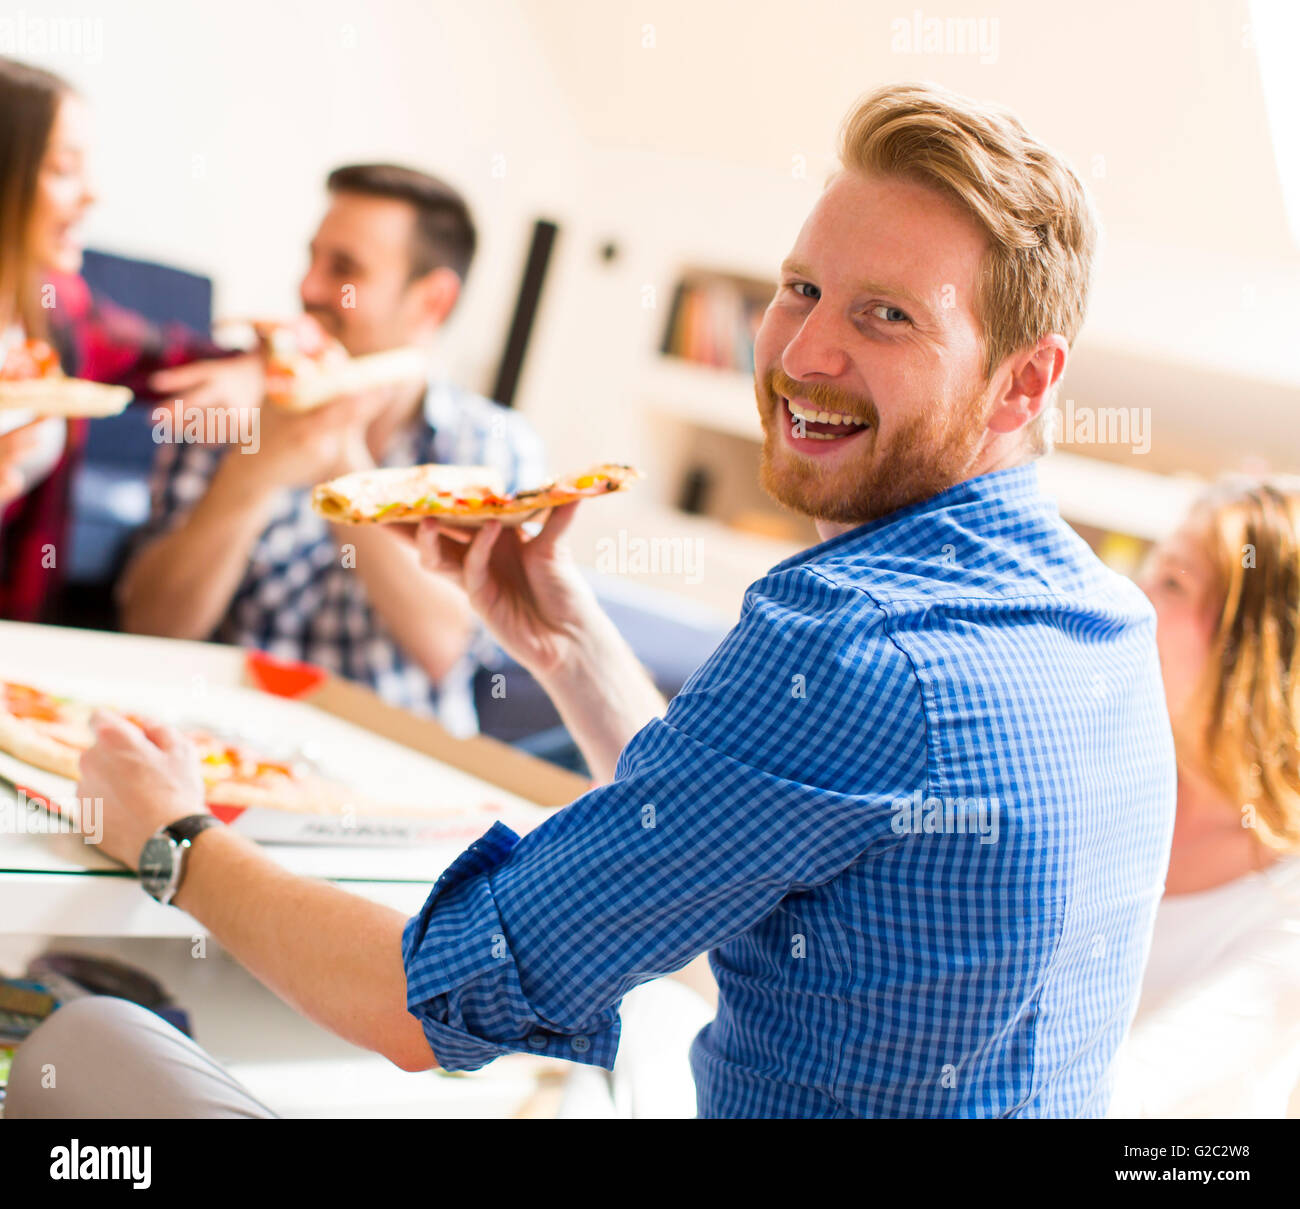 Group of happy young people eating pizza in the room Stock Photo